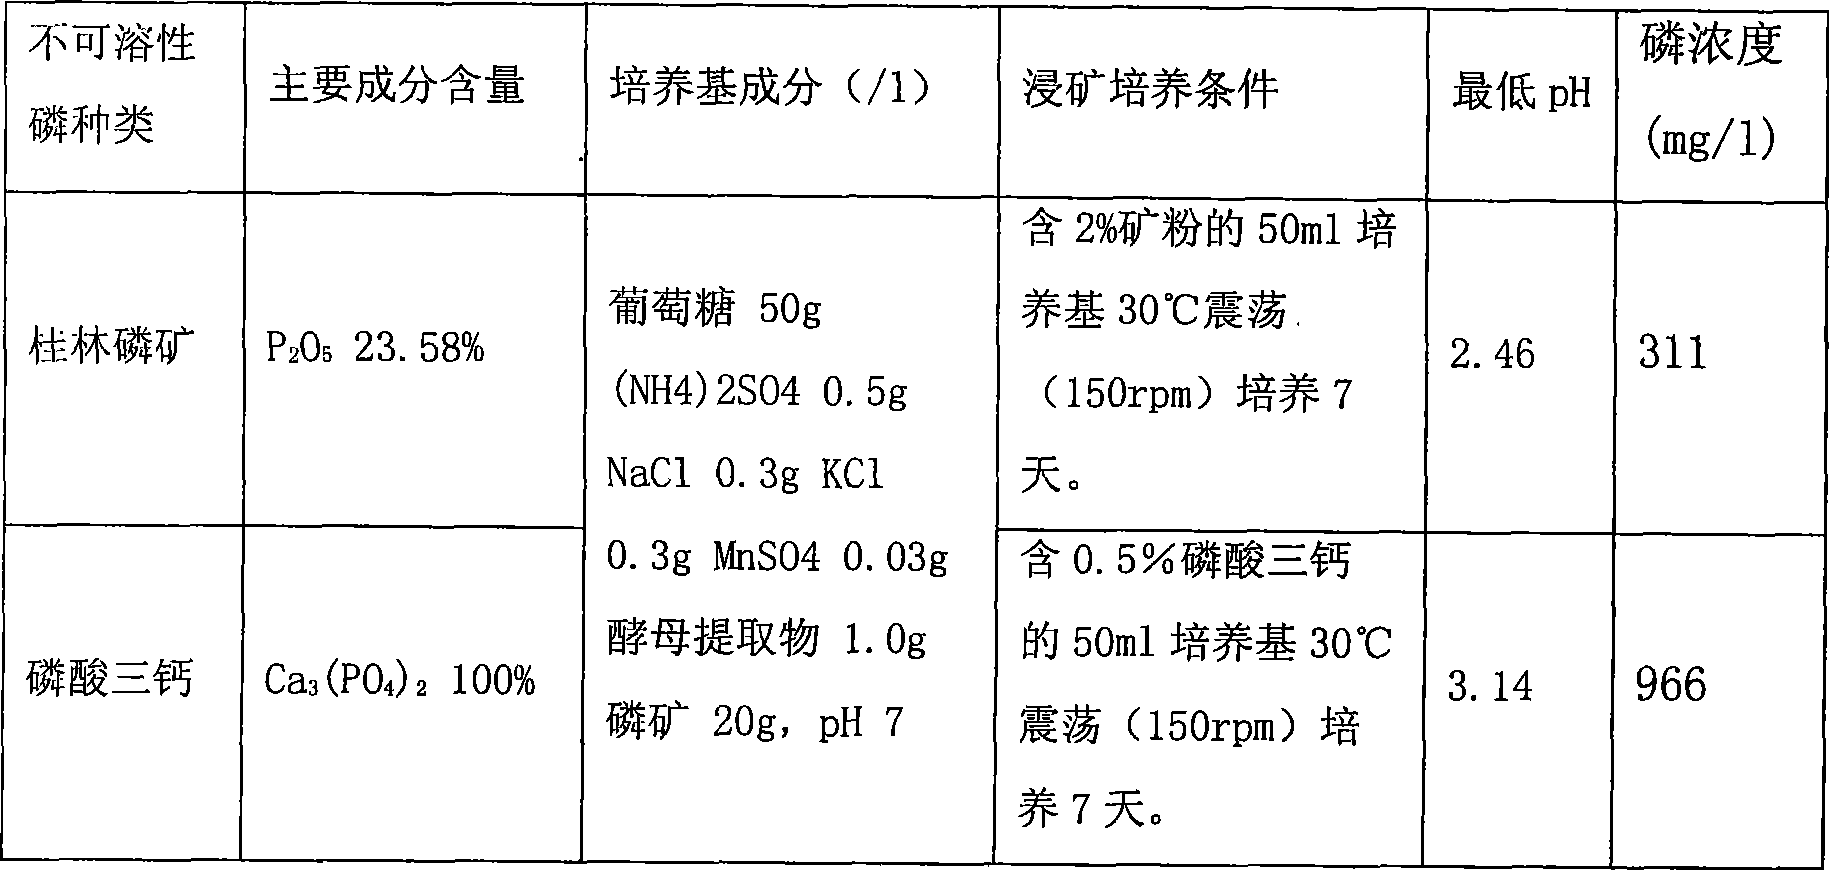 Penicillium, as well as preparation method and application